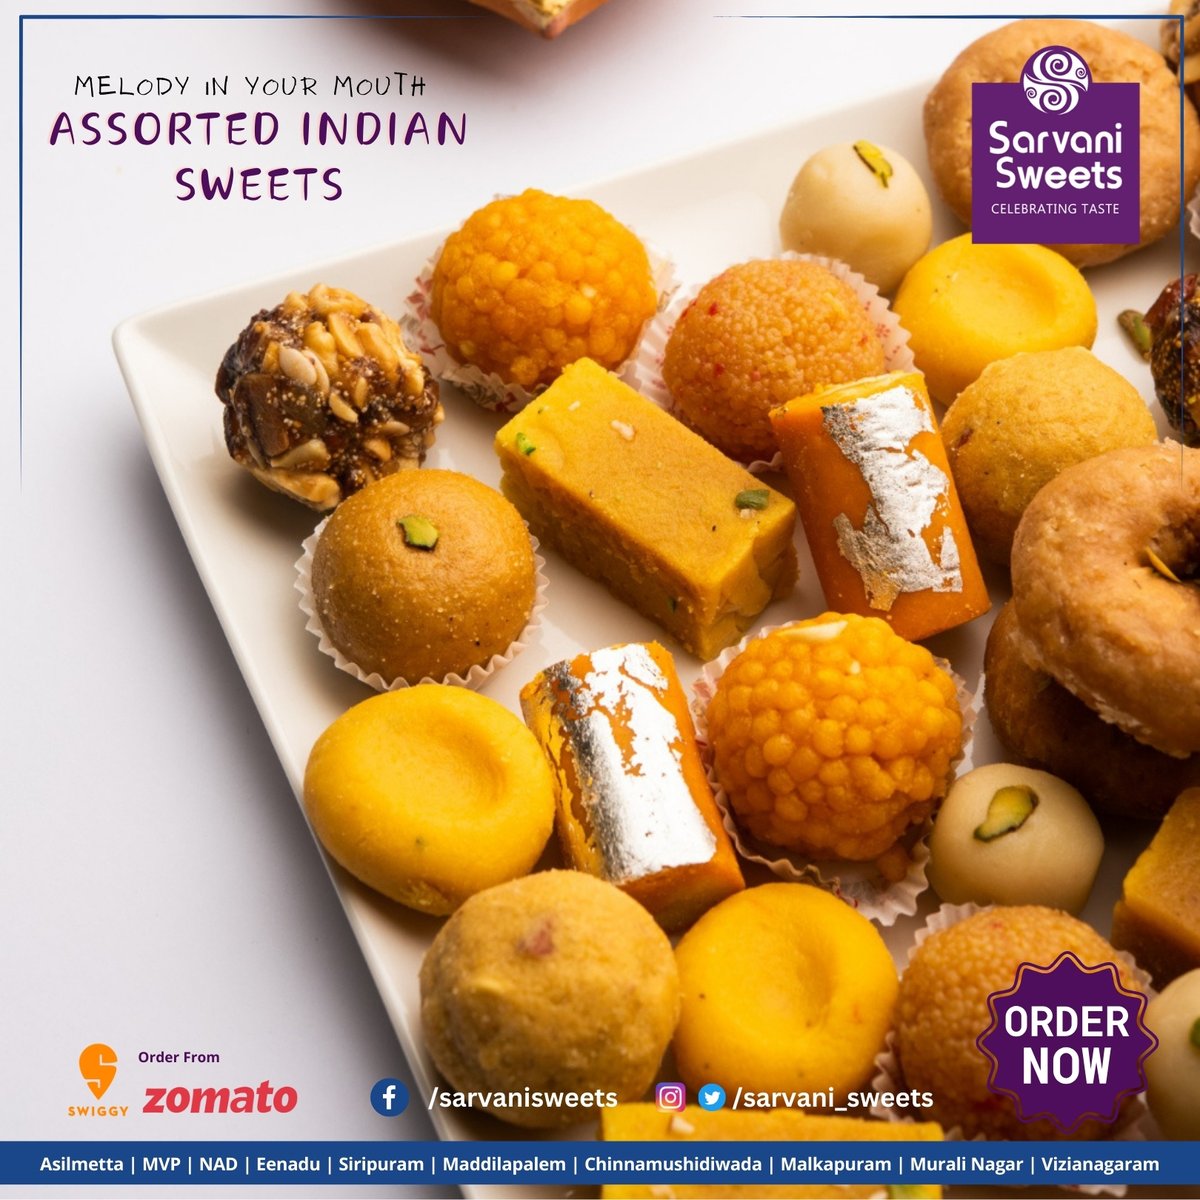 Assorted Sweets offer a delightful chance to explore a variety of flavours and textures in a single box.

@Sarvani_Sweets

#assortedsweets #sweets #indiansweets #yummy #traditionalsweets #sarvanisweets #tasty